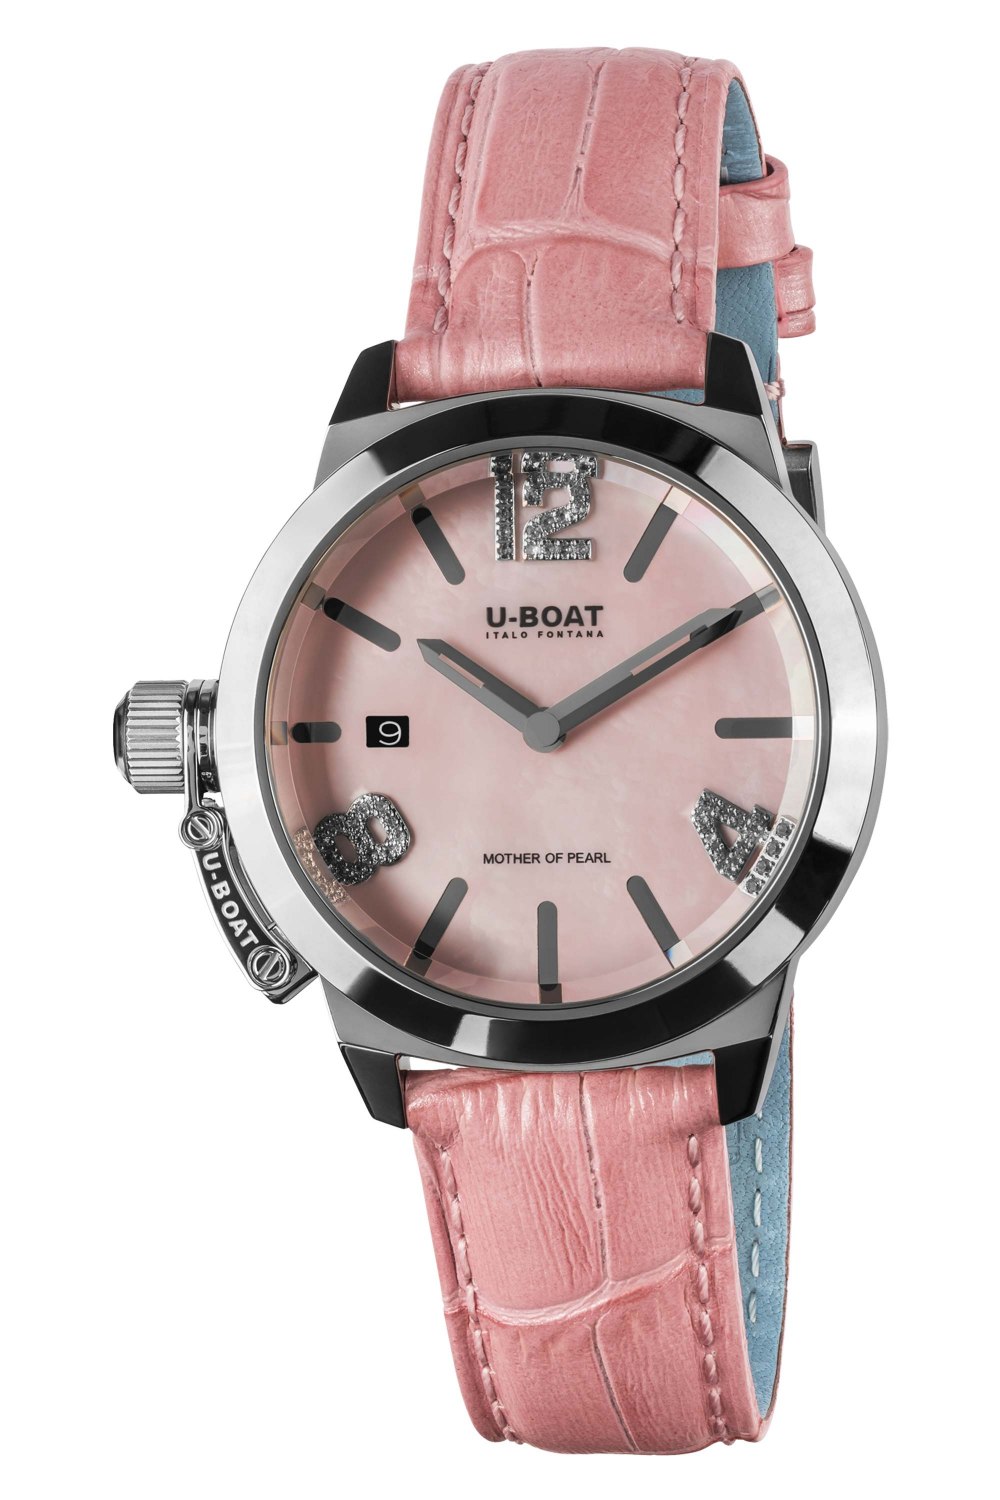 U-BOAT CLASSICO 38 Pink Mother of pearl 8480